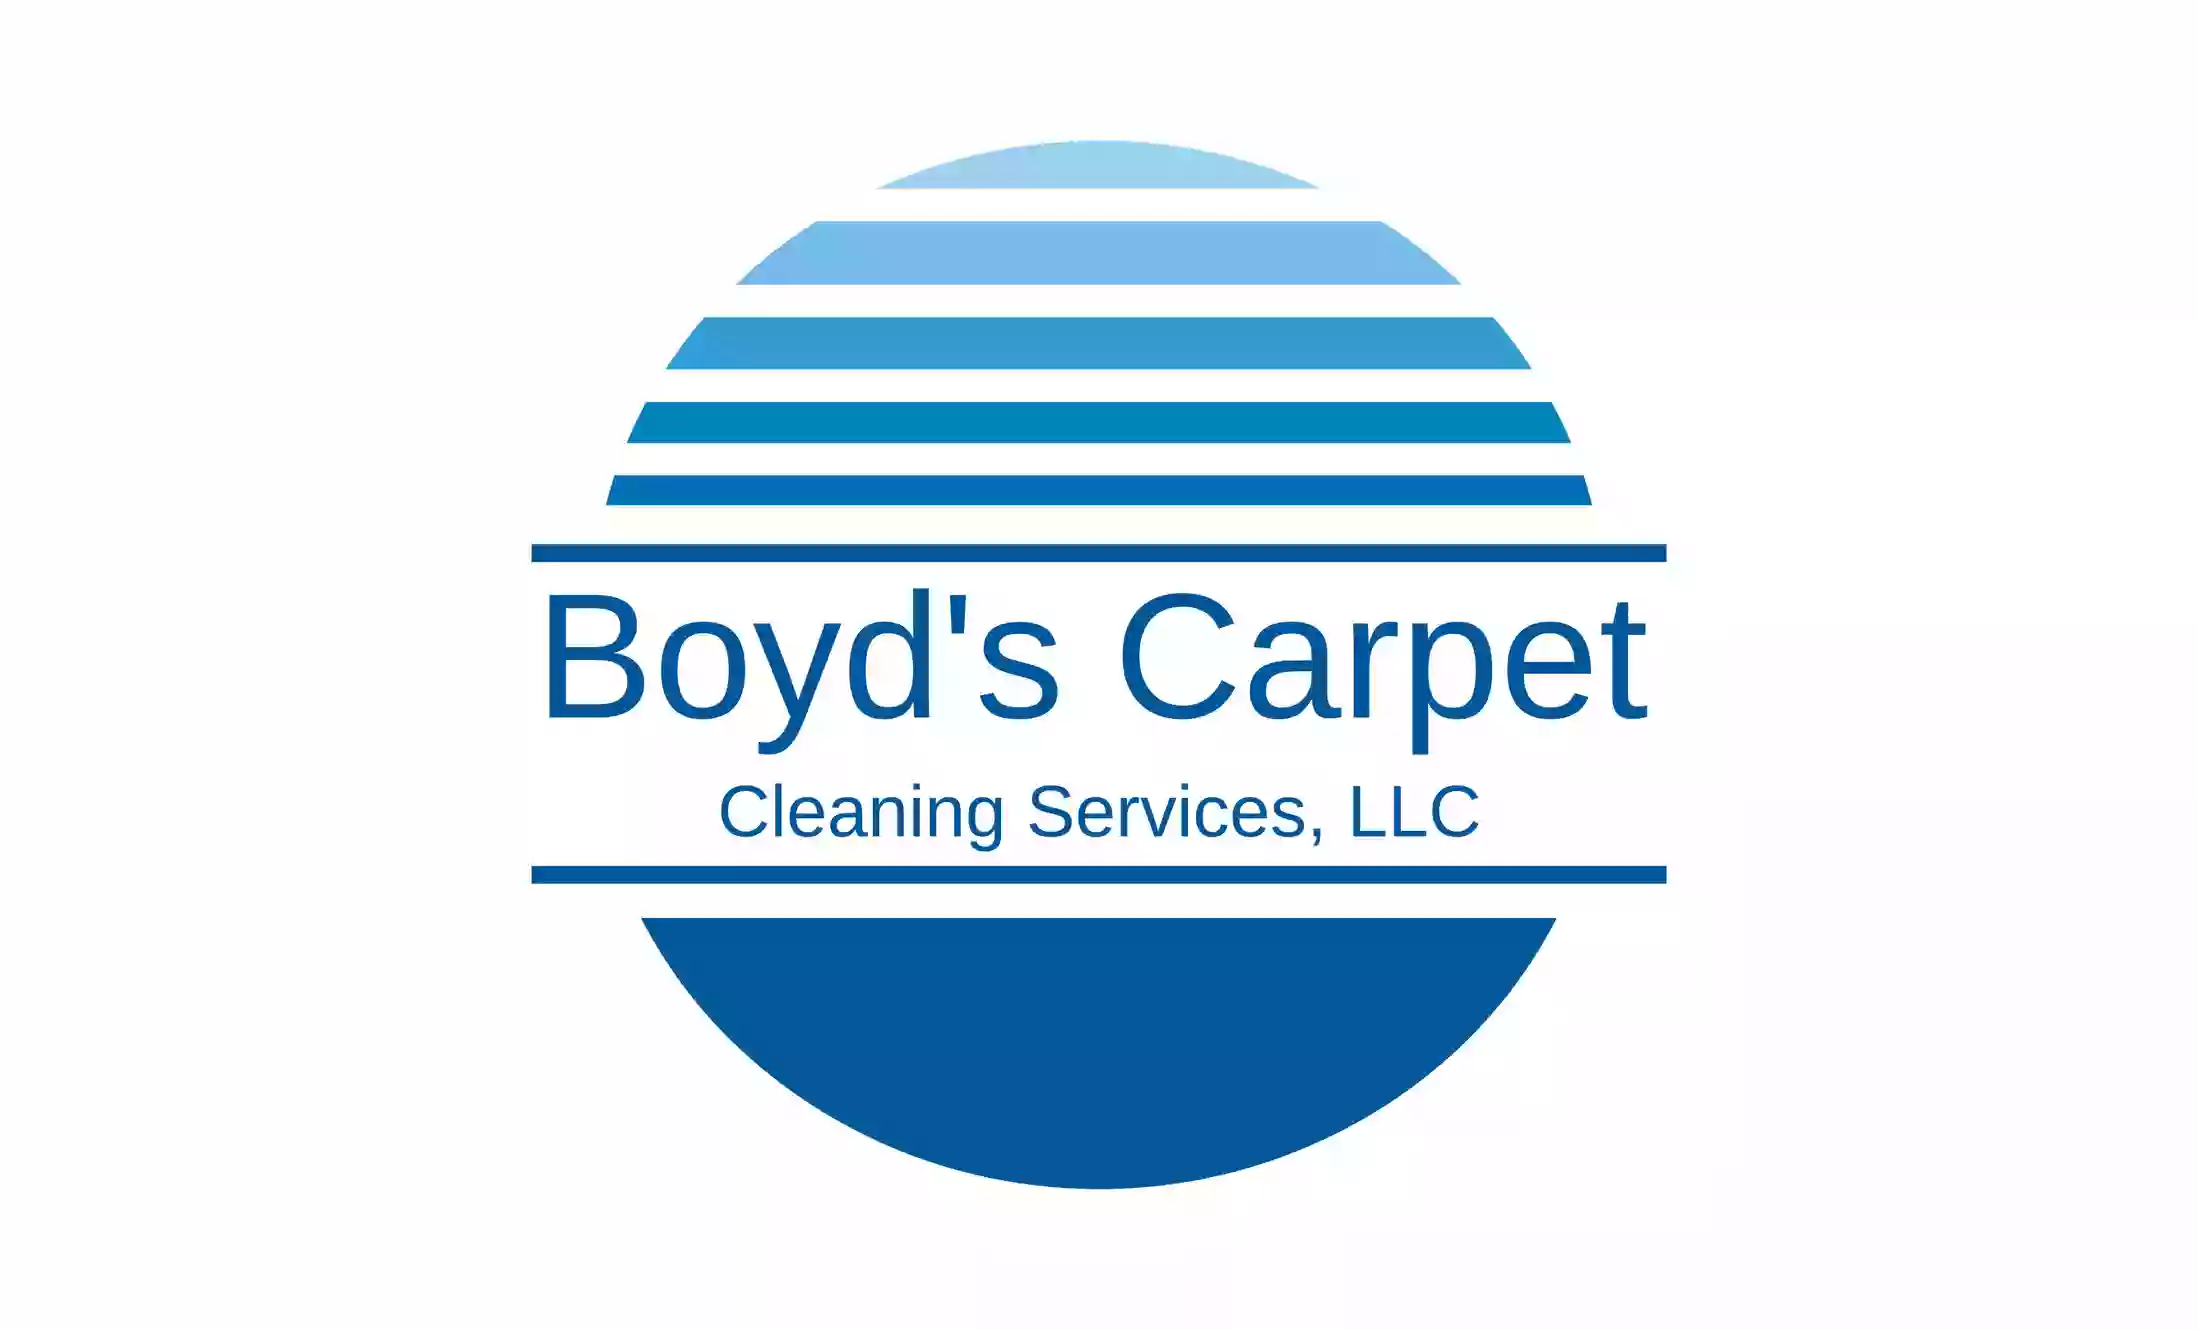 Boyd's Carpet Cleaning Services, LLC